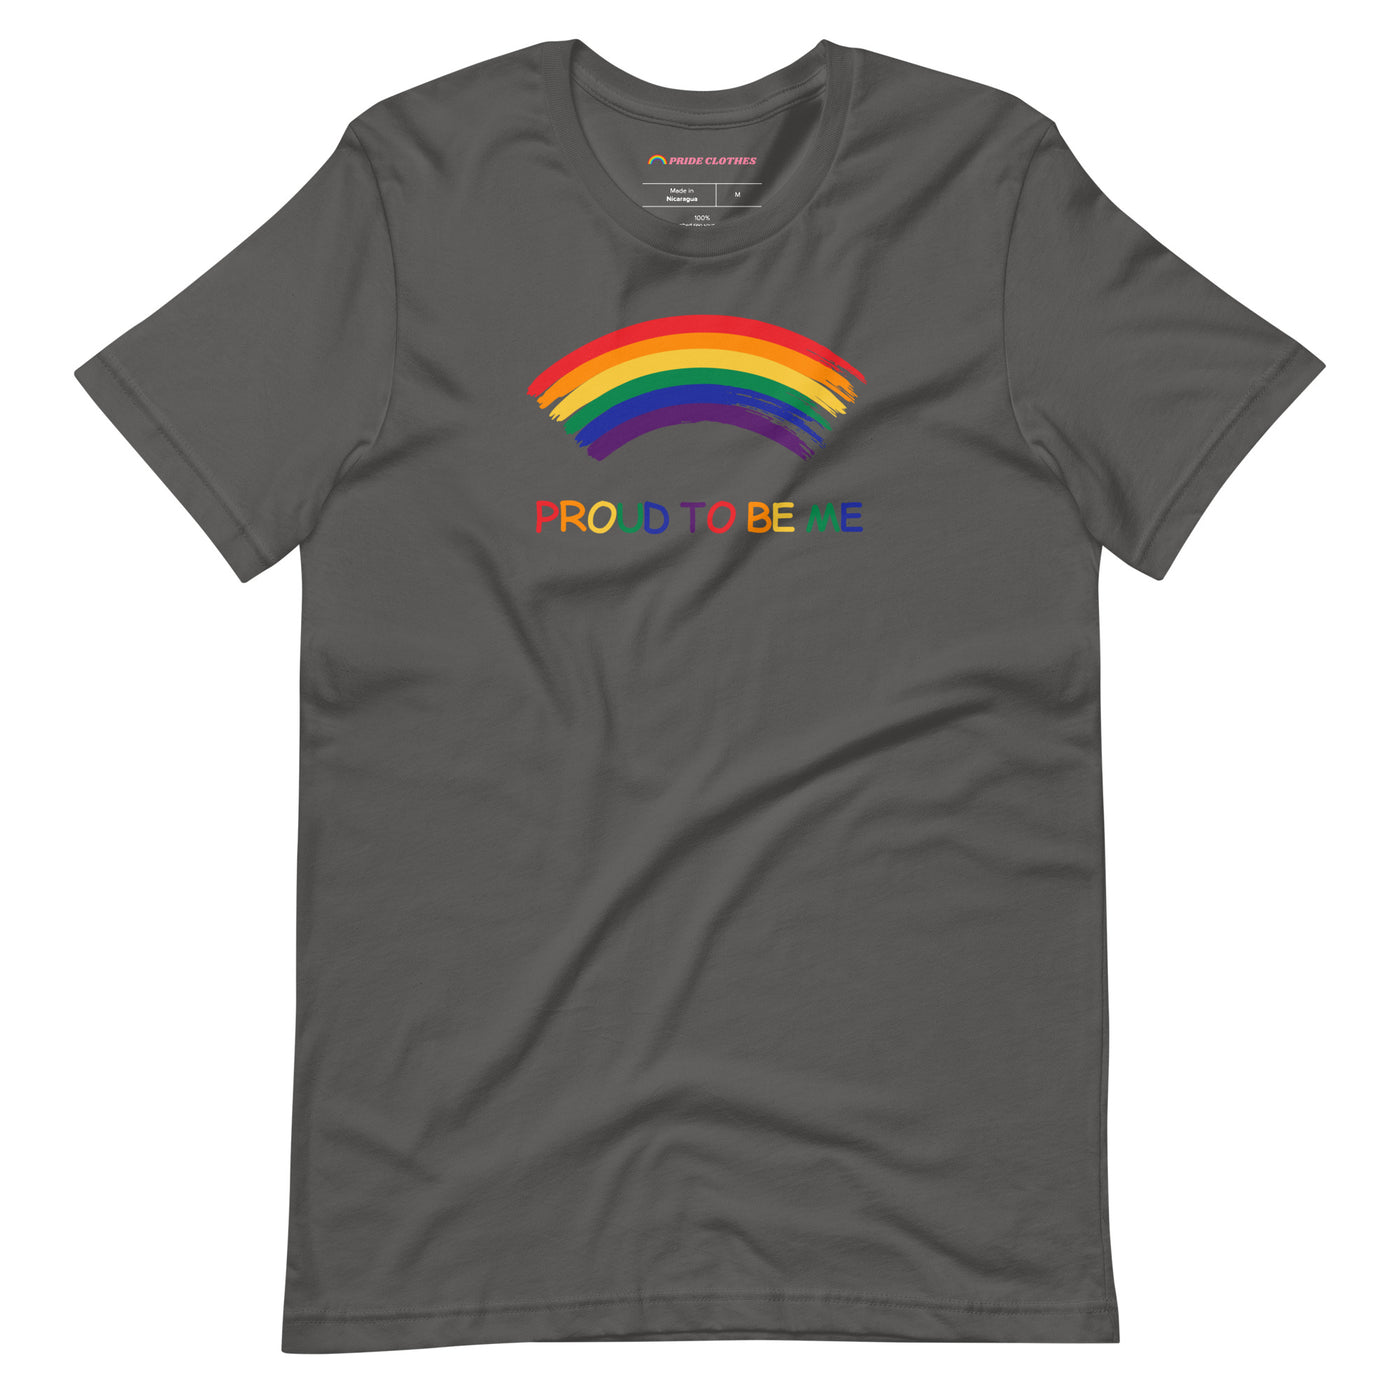 Pride Clothes - Front and Center Proud to Be Me Rainbow LGBTQ+ TShirt - Asphalt